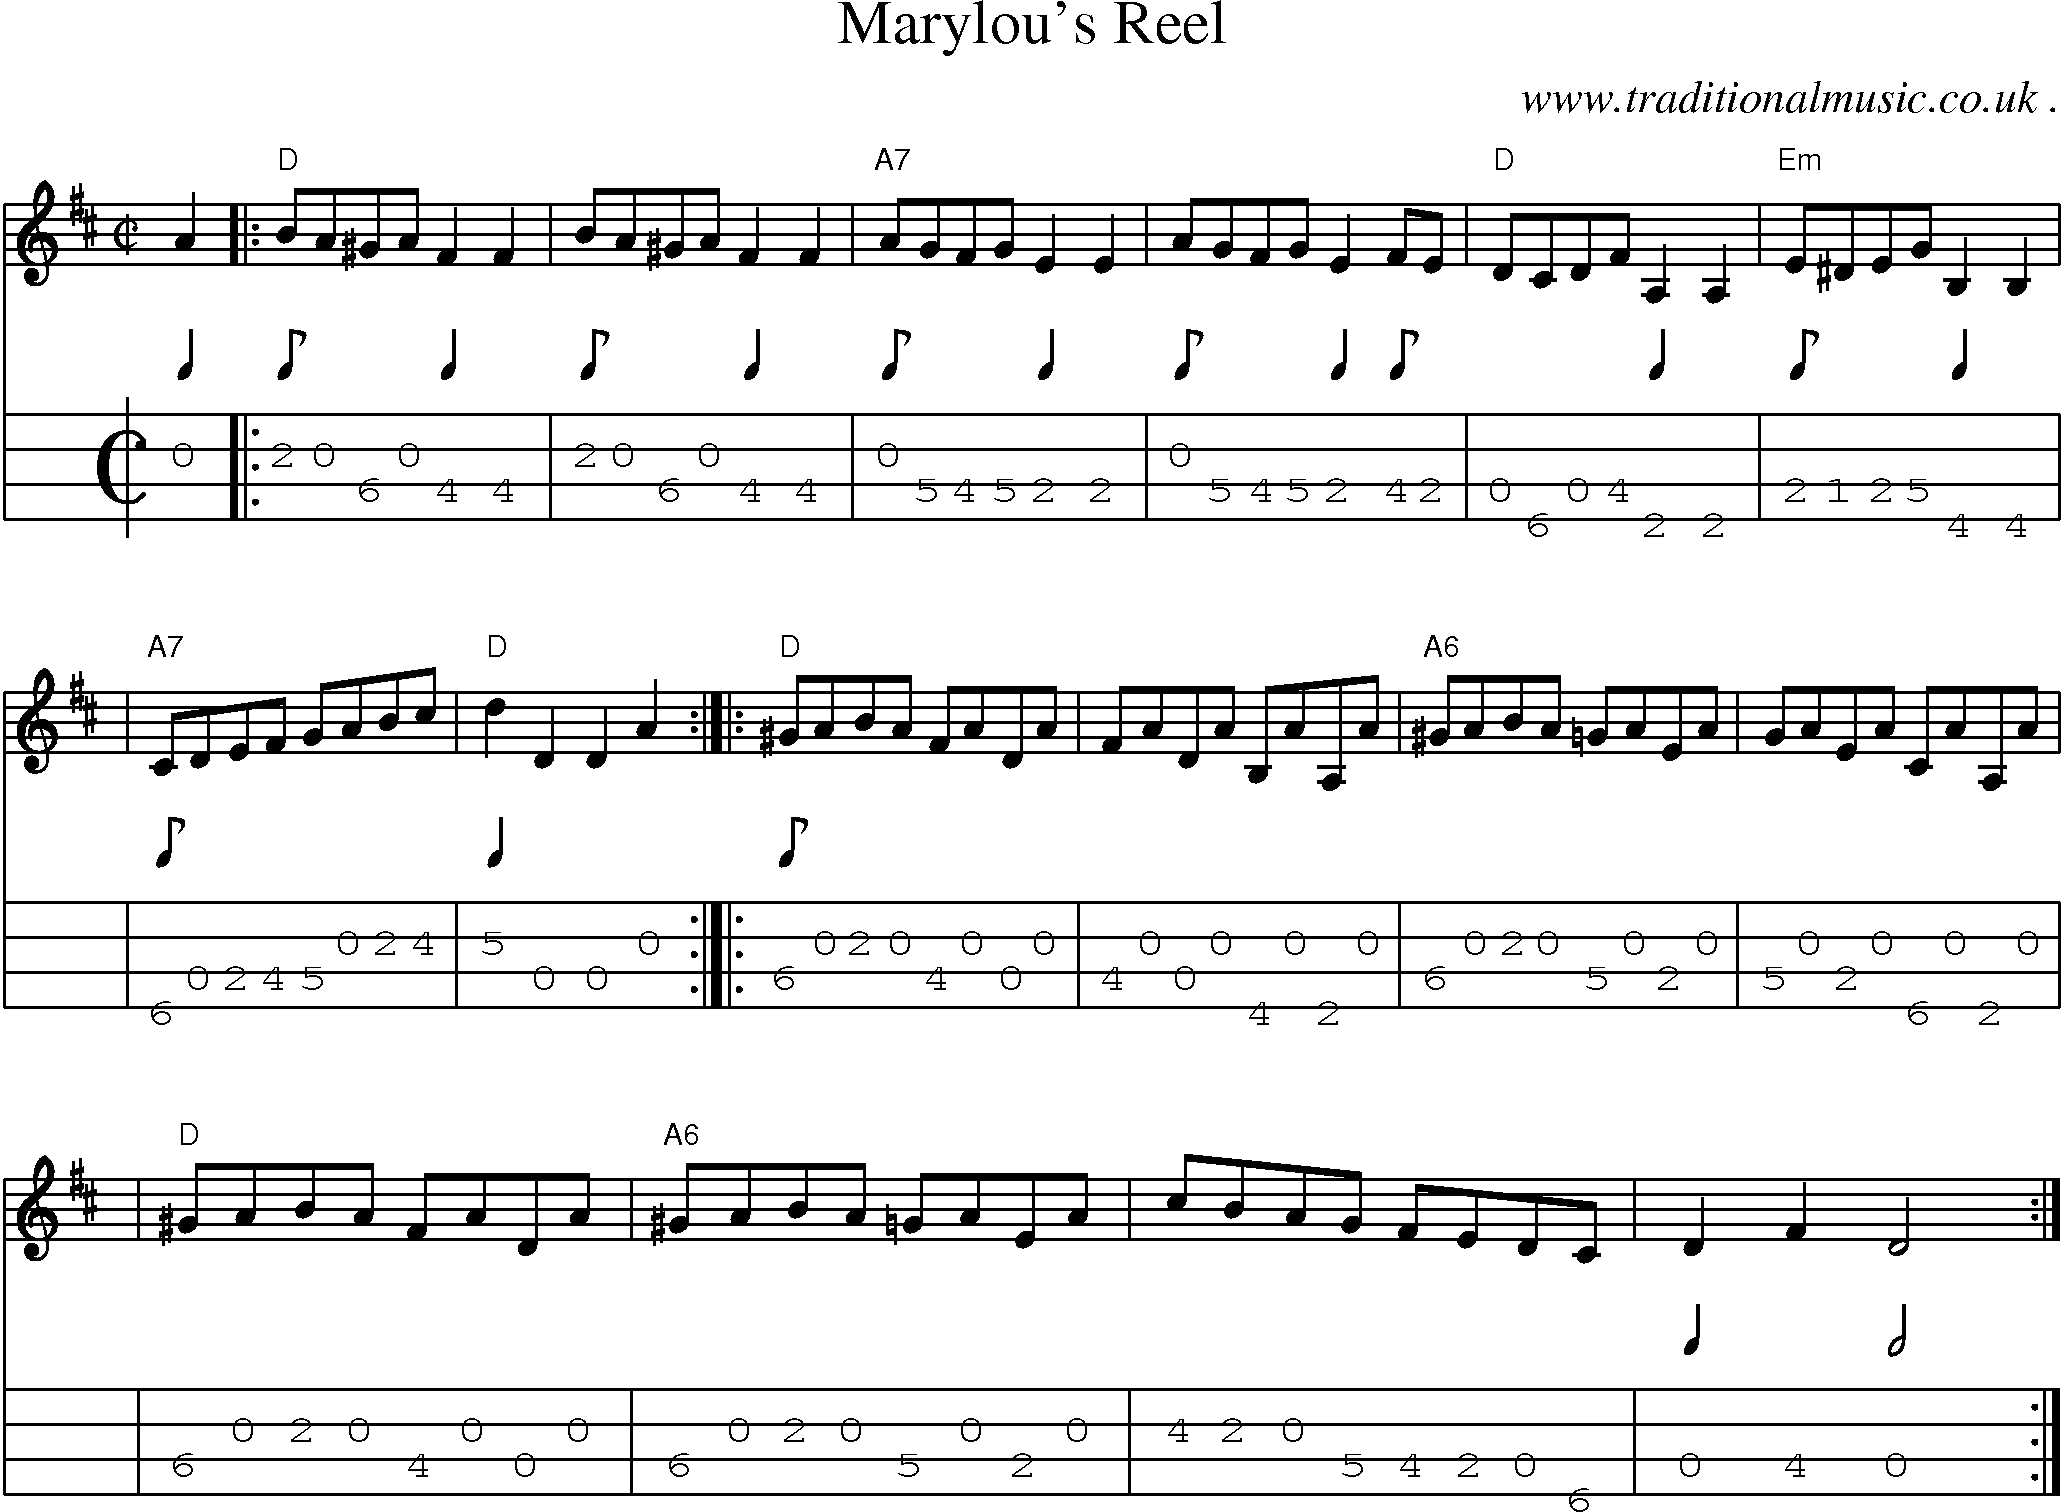 Sheet-music  score, Chords and Mandolin Tabs for Marylous Reel